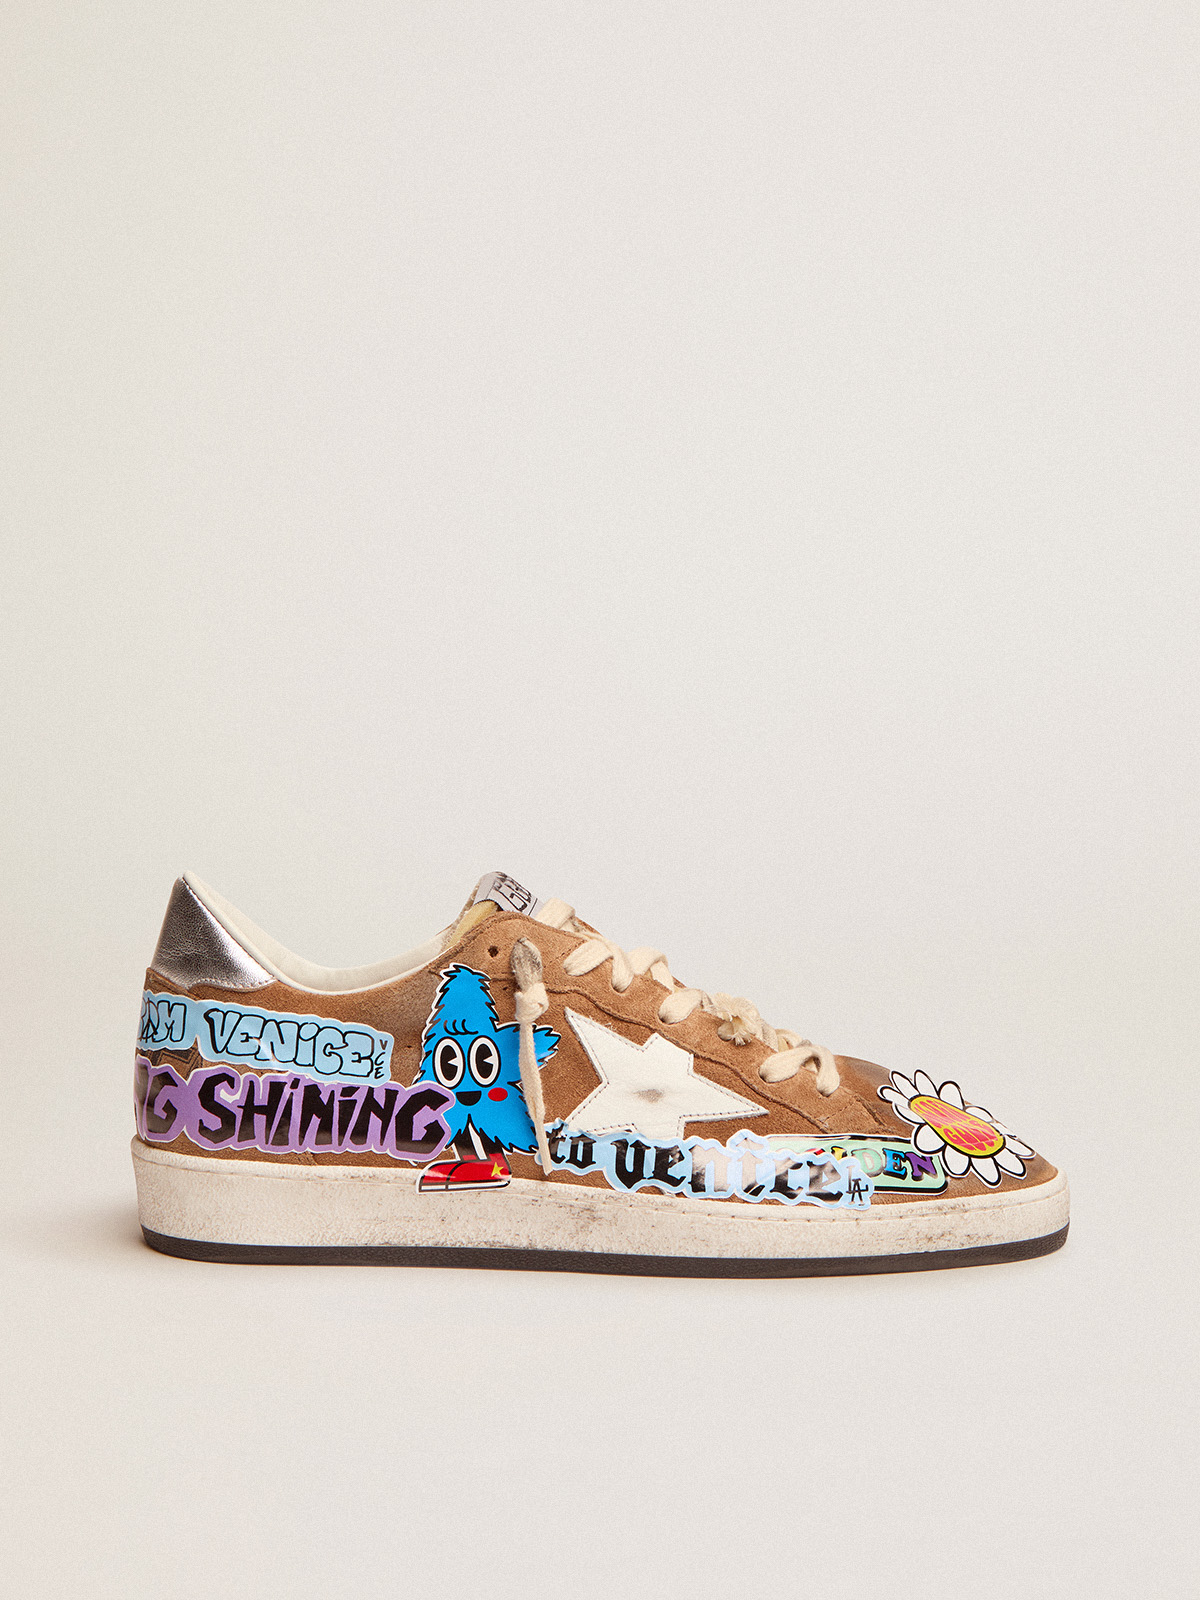 Ball Star sneakers in tobacco-colored suede with a white leather star and  multicolored stickers | Golden Goose